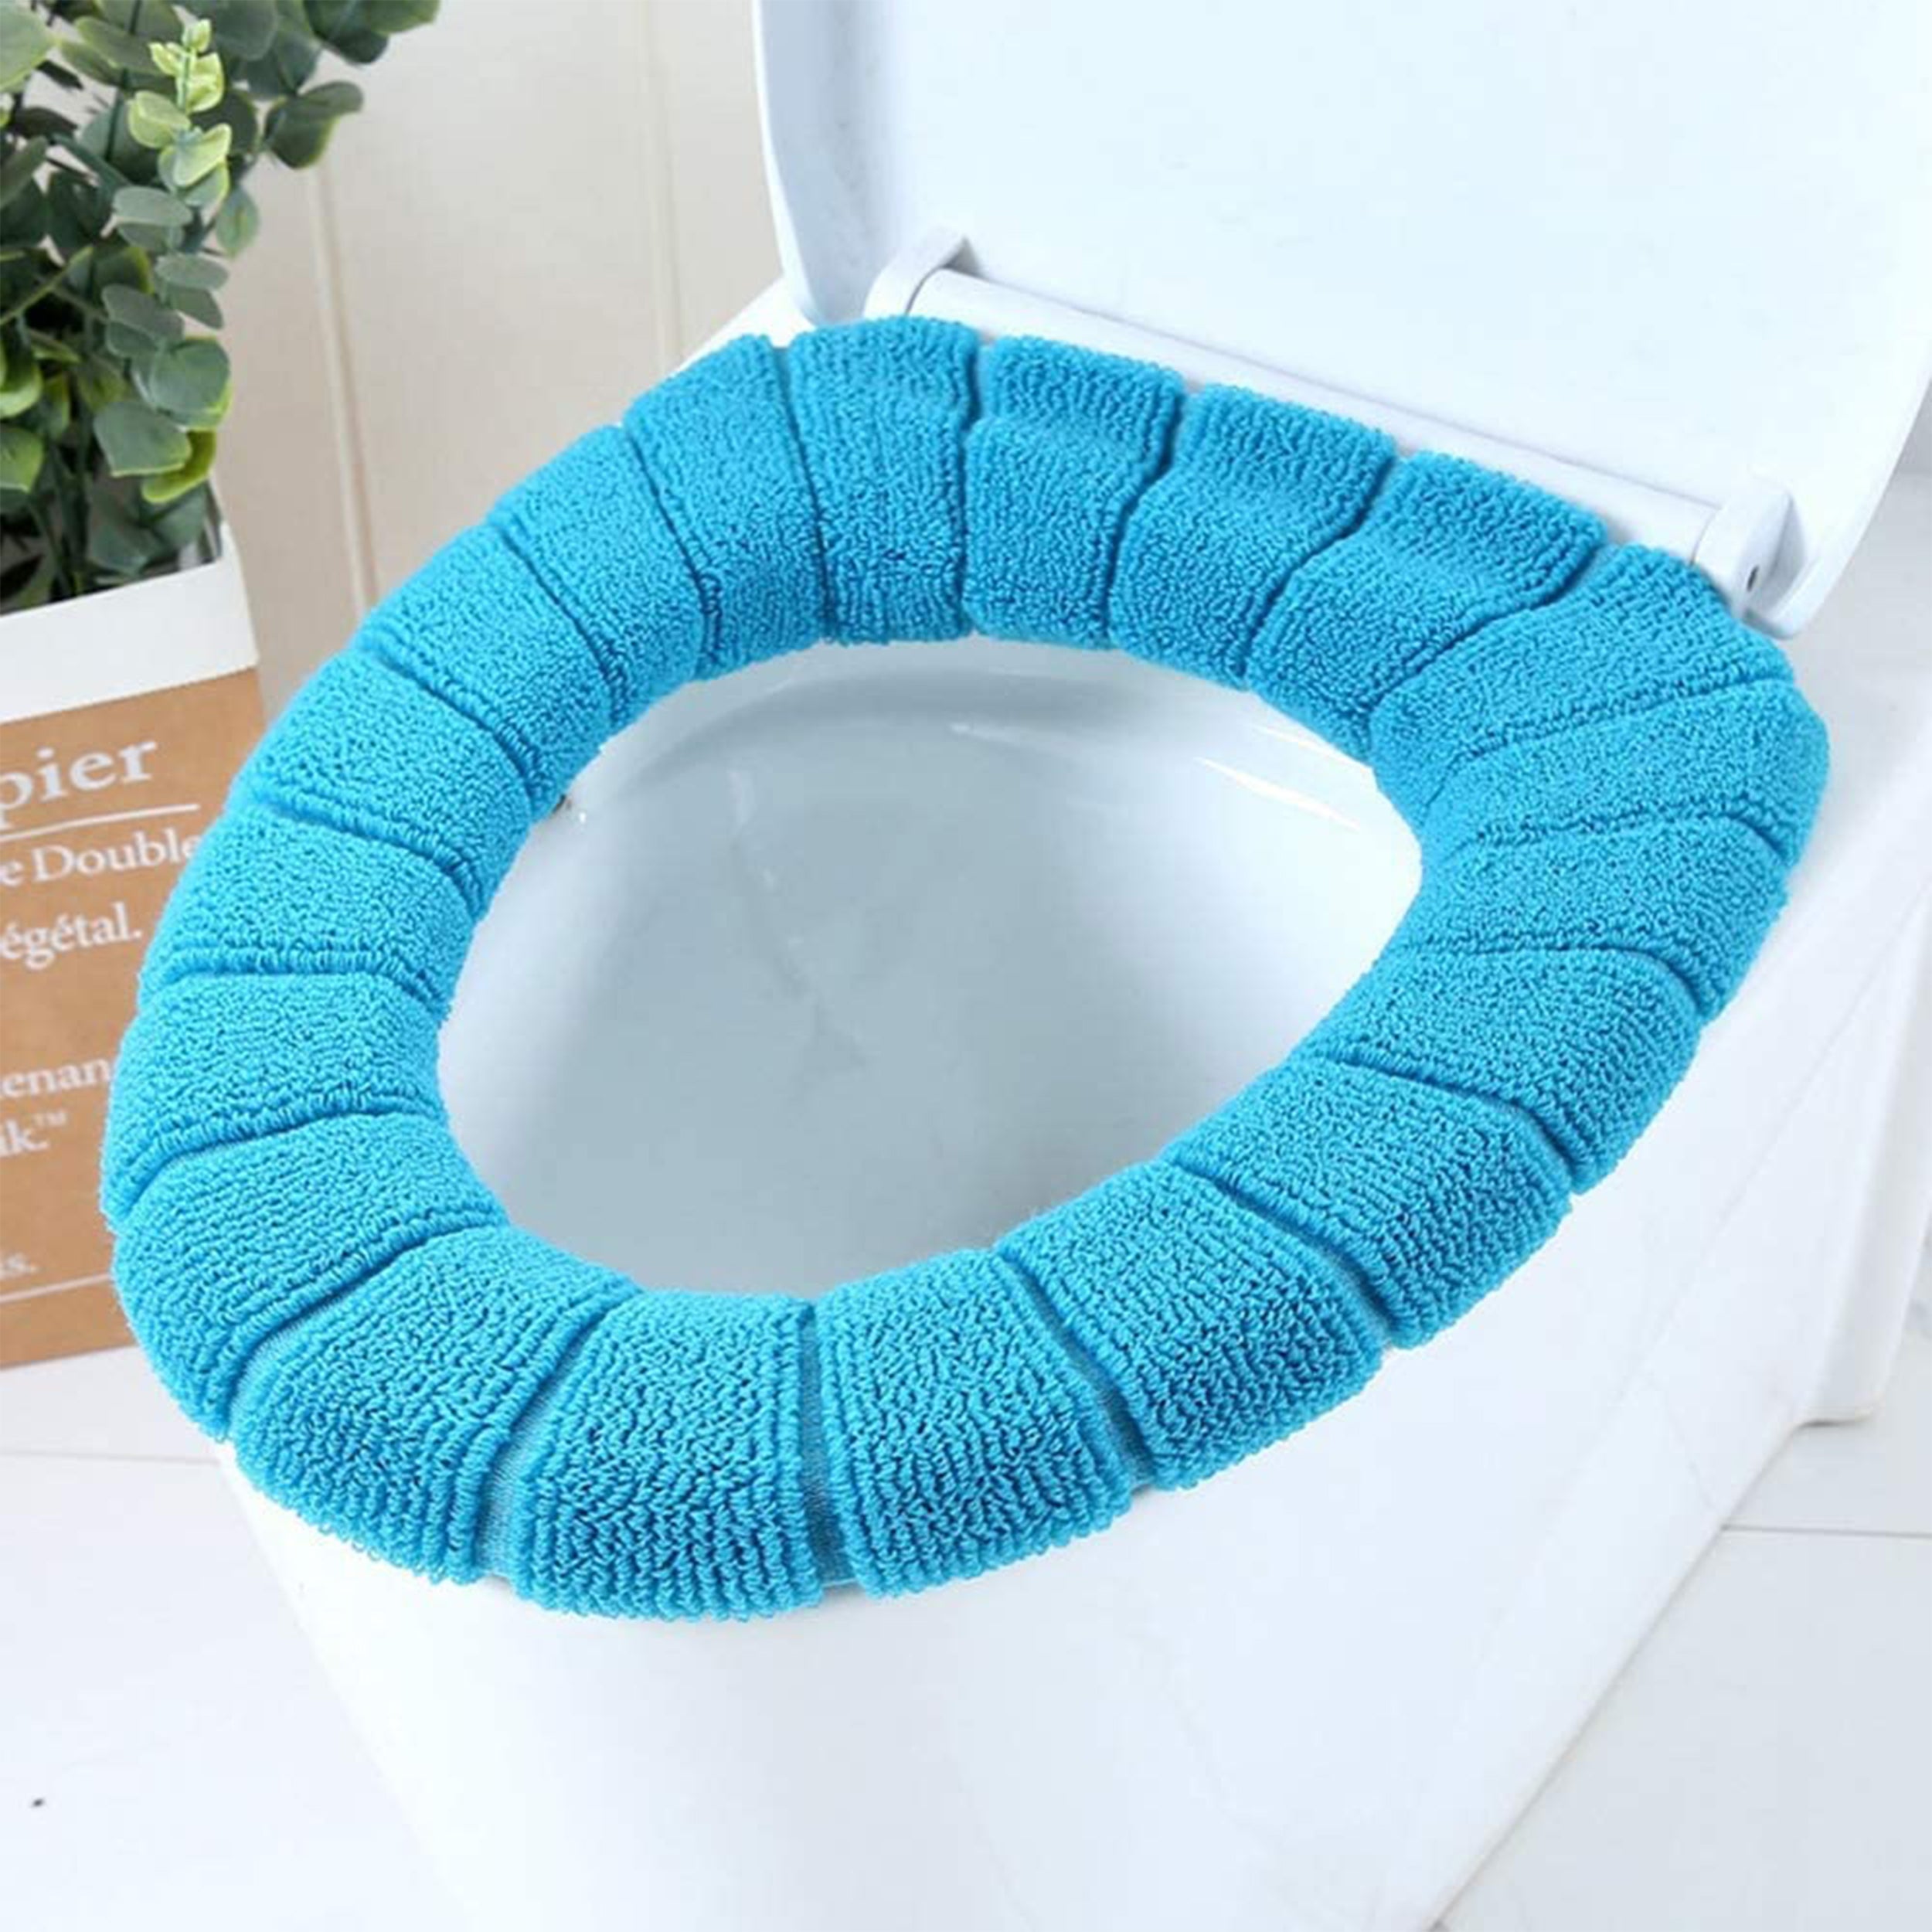 Keep Your Bathroom Comfortable with Soft Seat Covers for Toilets